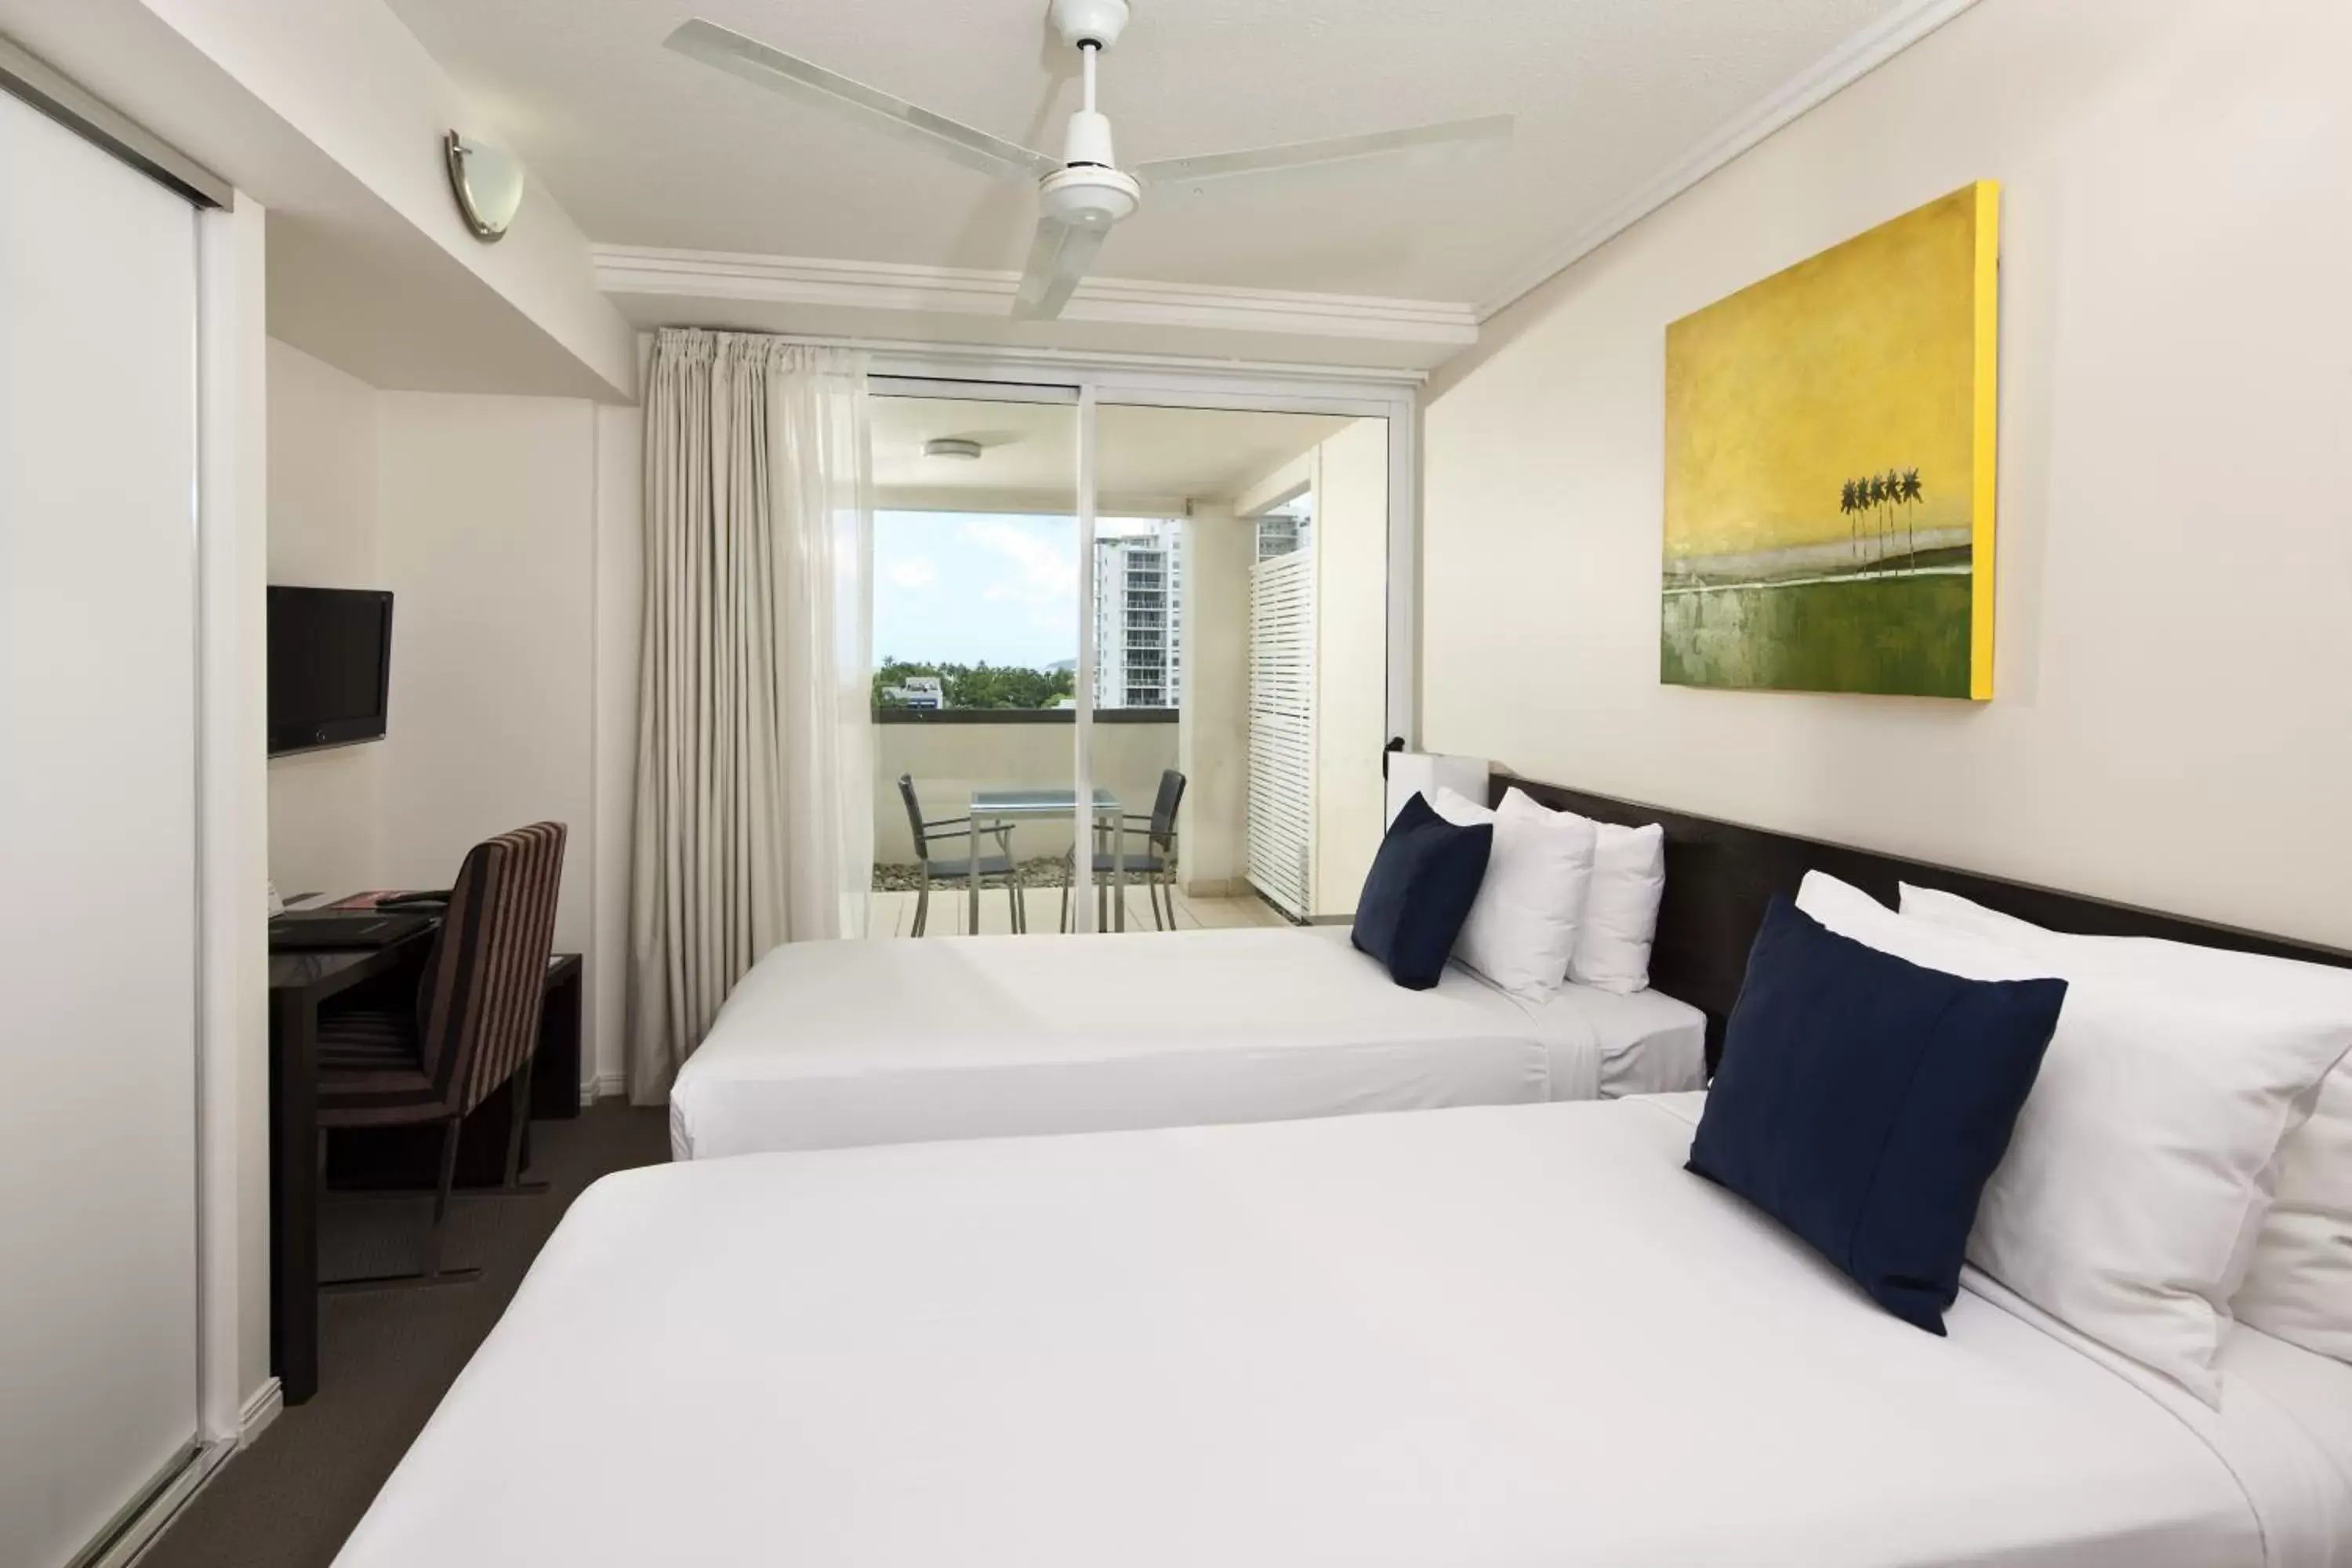 Executive Hotel Studio in Cairns Central Plaza Apartment Hotel